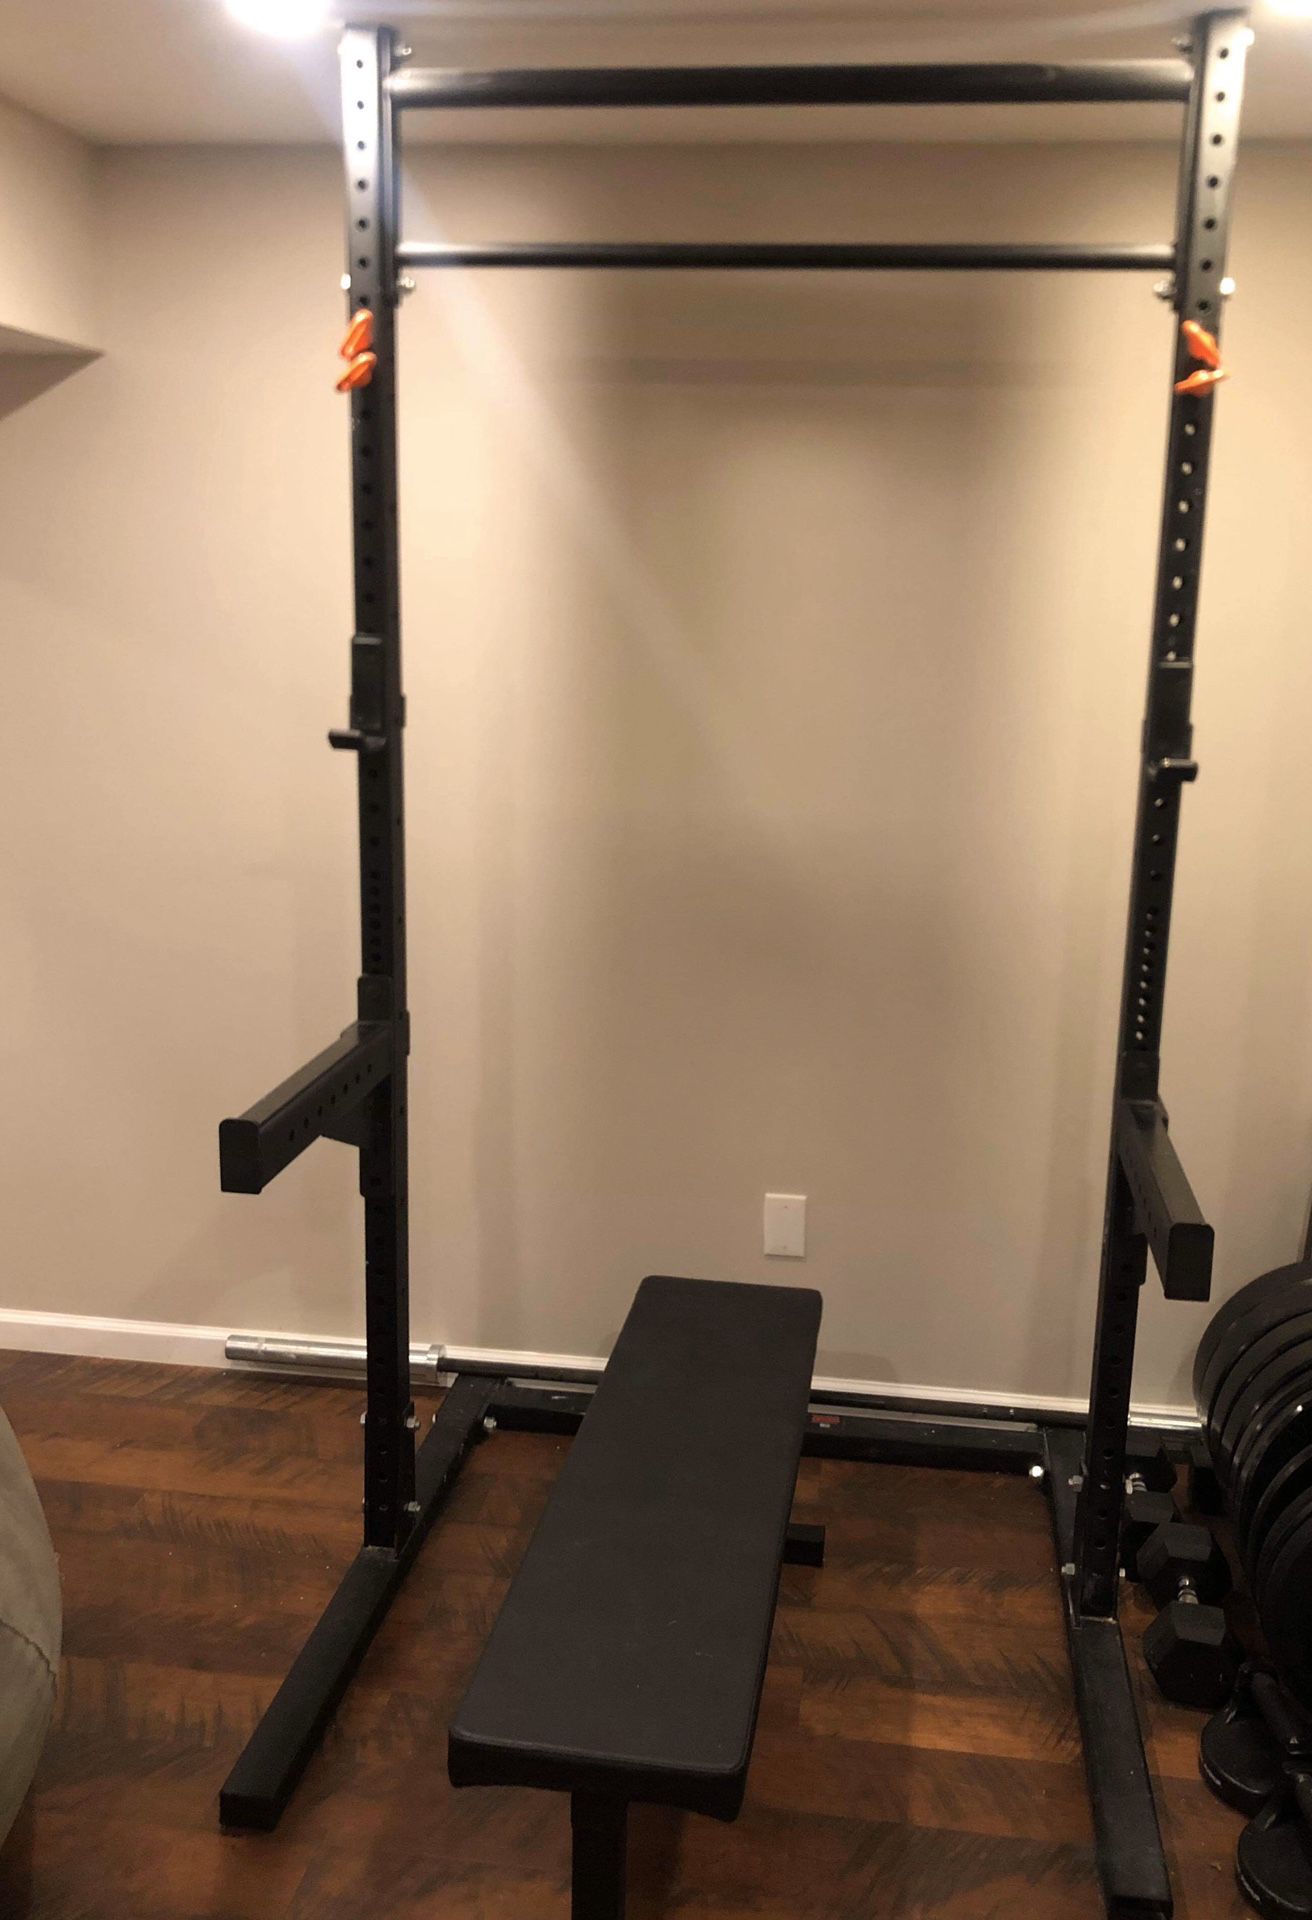 Rogue S squat stand 2.0 comes with Rogue safety spotter arm and Rogue flat utility bench. Barely used